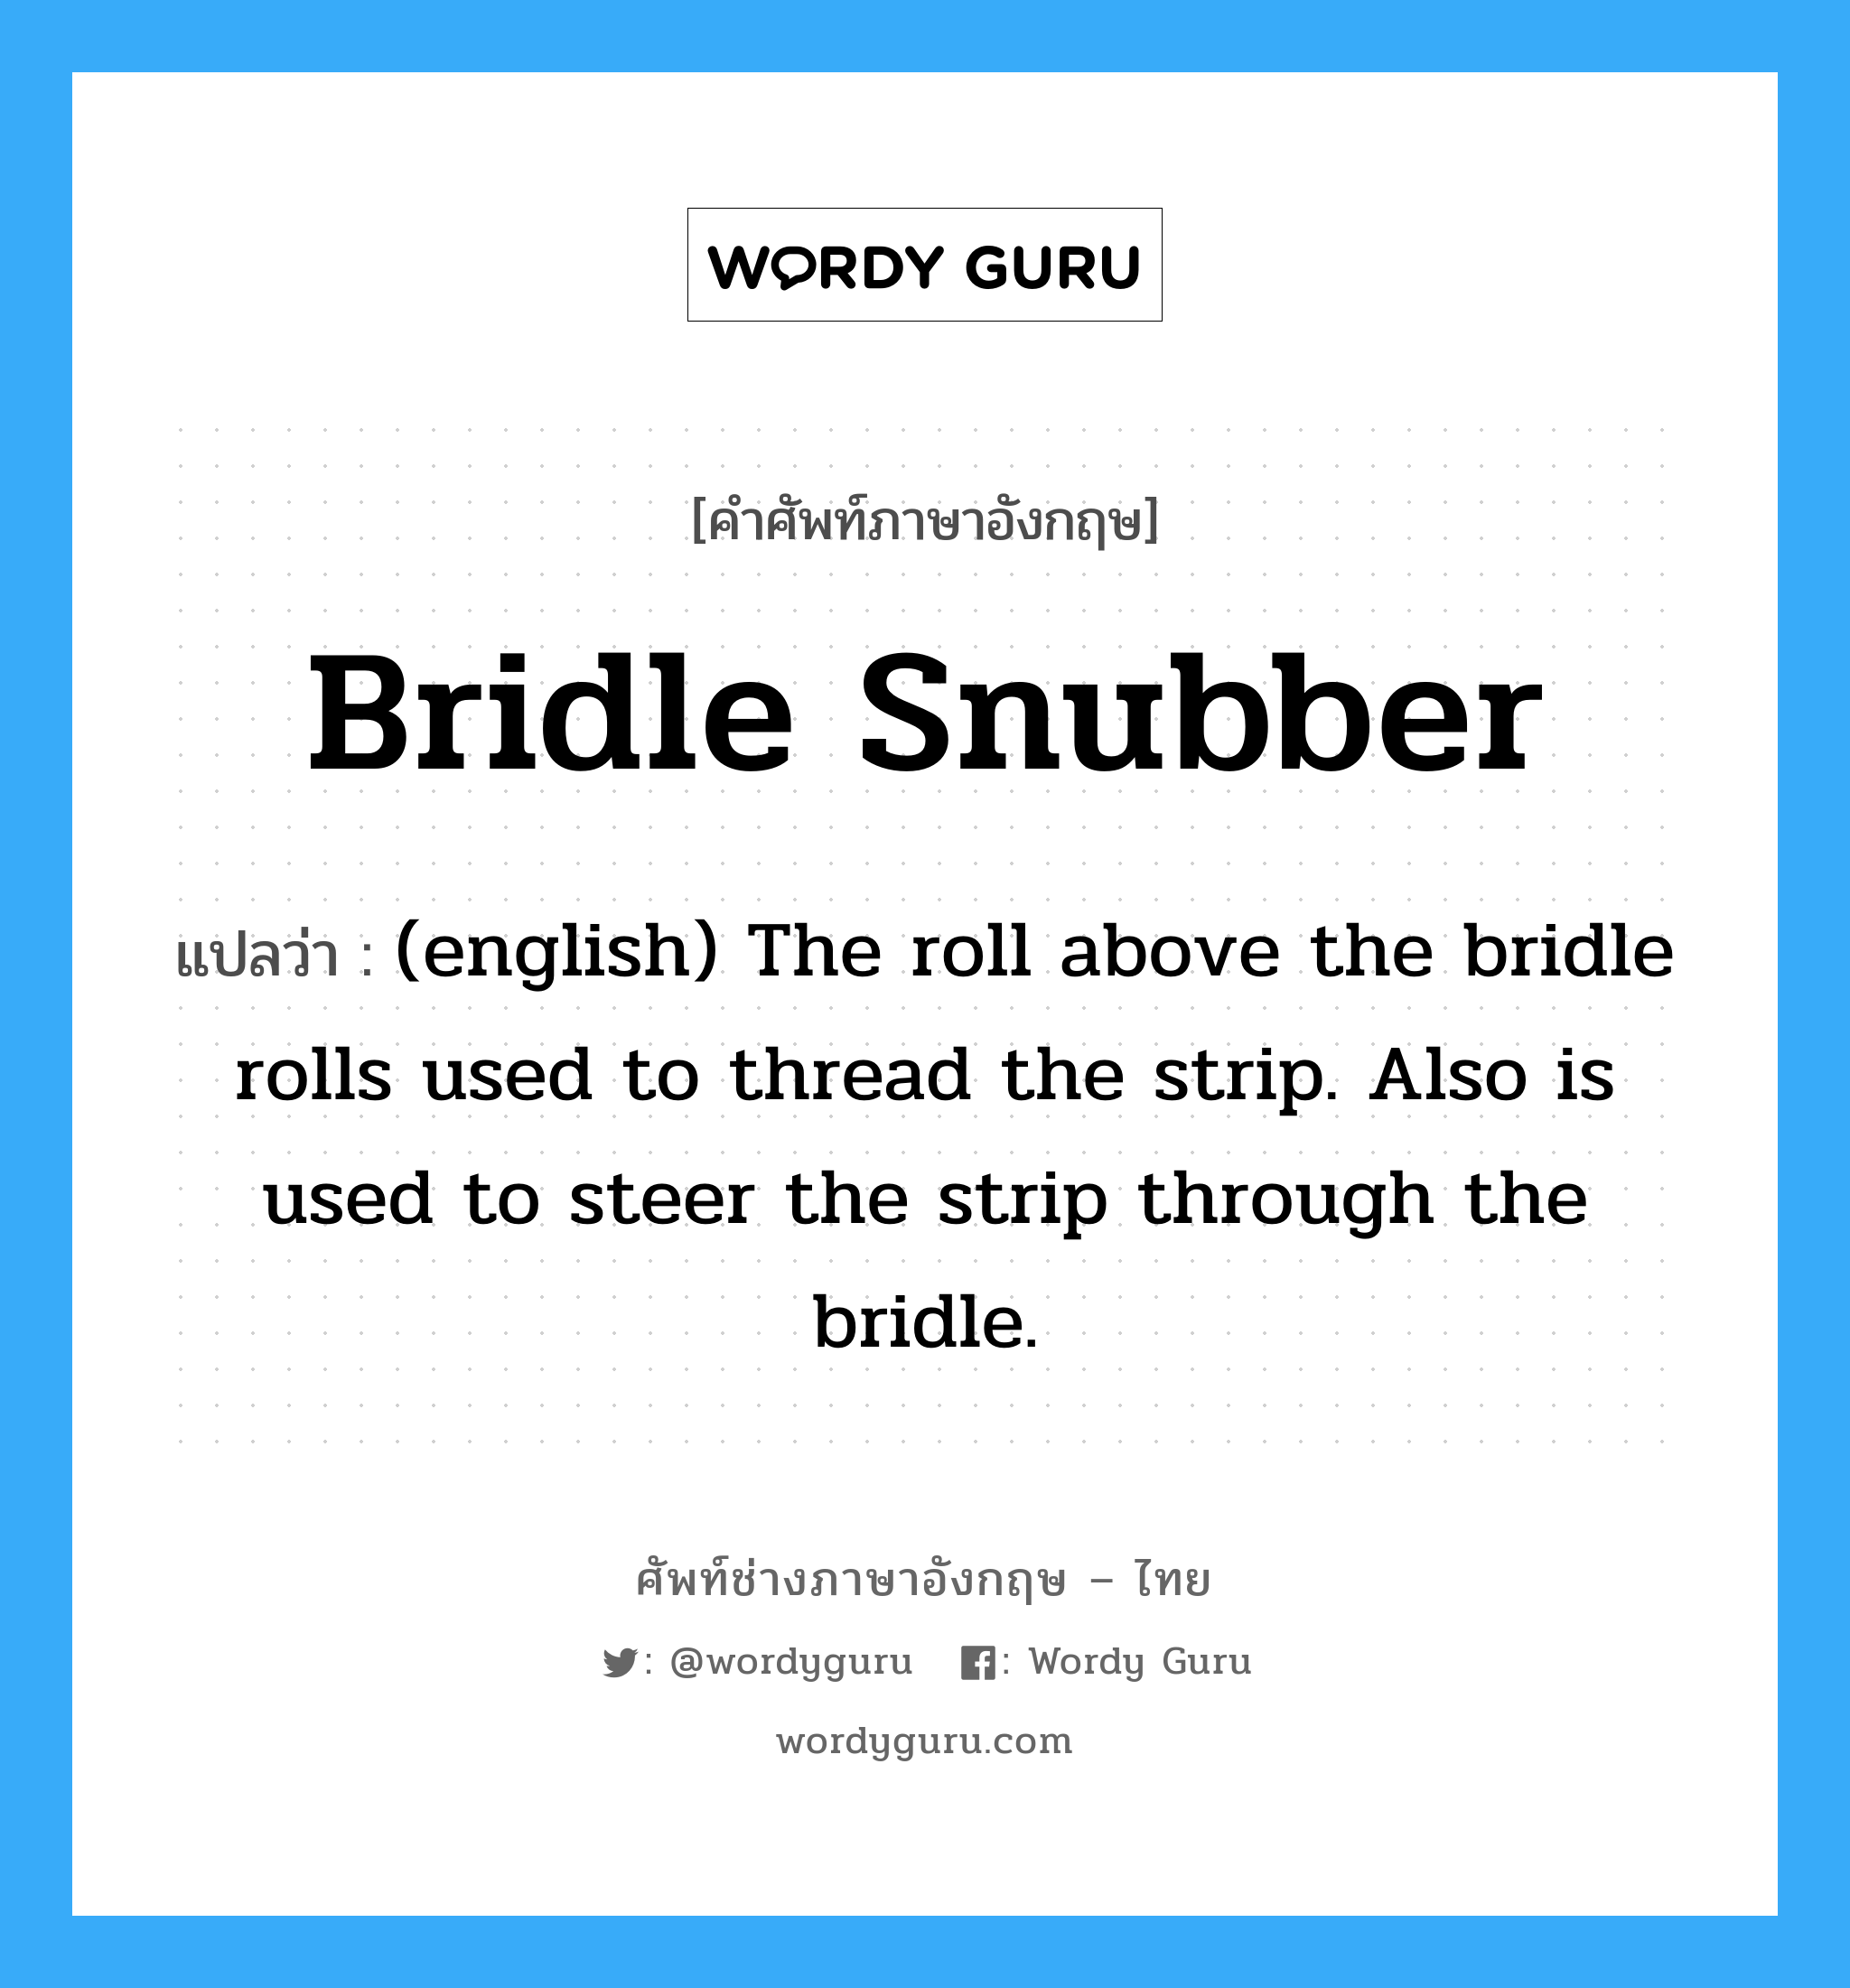 Bridle Snubber แปลว่า?, คำศัพท์ช่างภาษาอังกฤษ - ไทย Bridle Snubber คำศัพท์ภาษาอังกฤษ Bridle Snubber แปลว่า (english) The roll above the bridle rolls used to thread the strip. Also is used to steer the strip through the bridle.